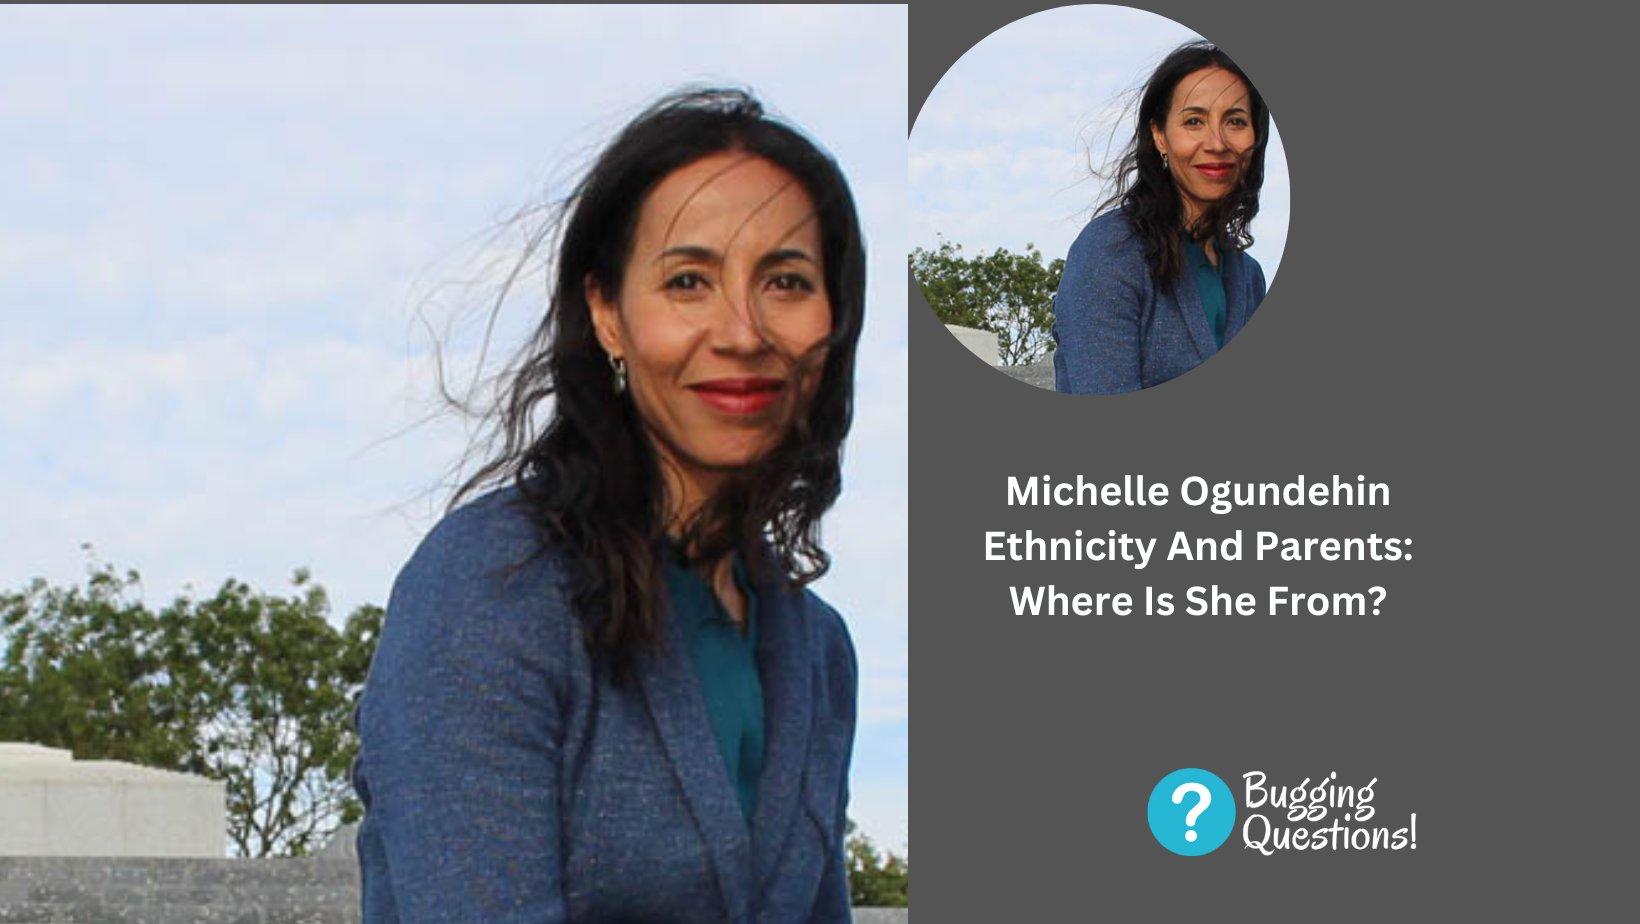 Michelle Ogundehin Ethnicity And Parents: Where Is She From?